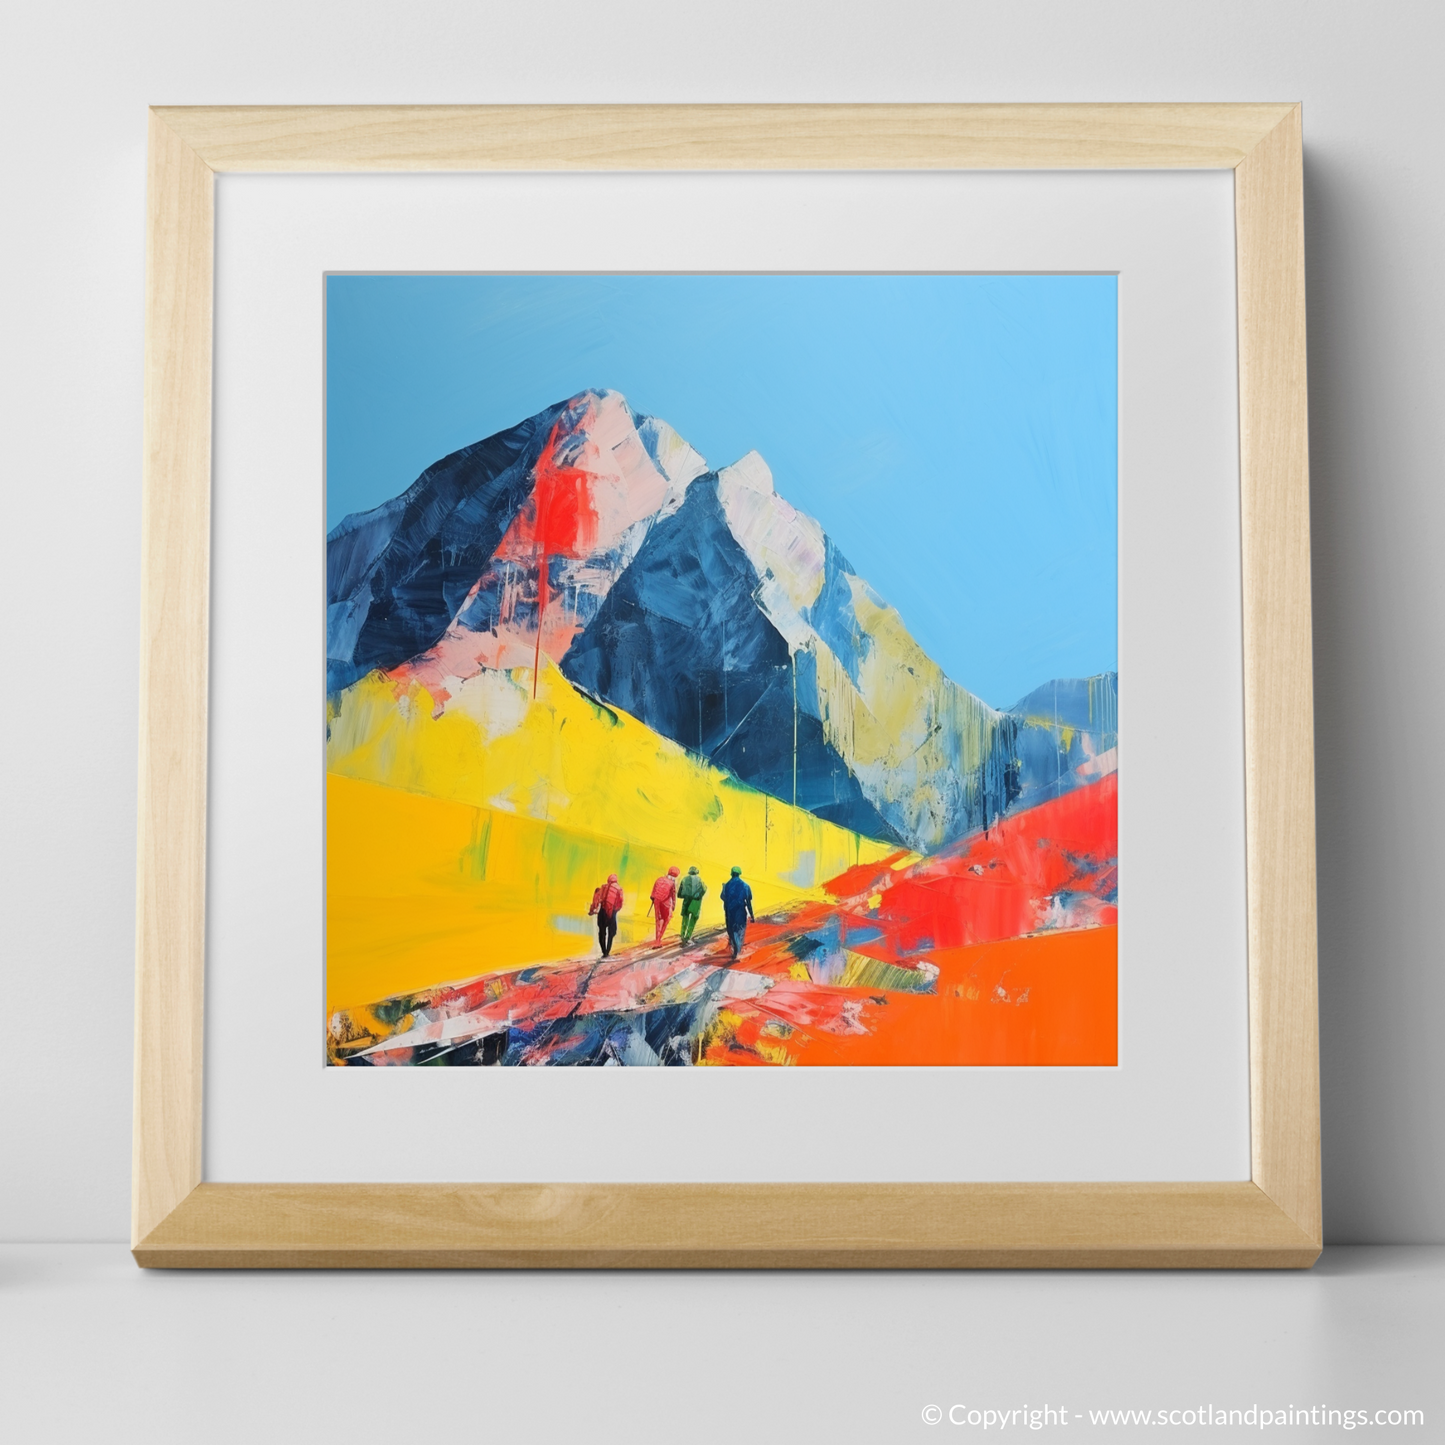 Painting and Art Print of Hikers in Glencoe. Hikers in Glencoe: A Minimalist Ode to Scotland's Wild Terrain.